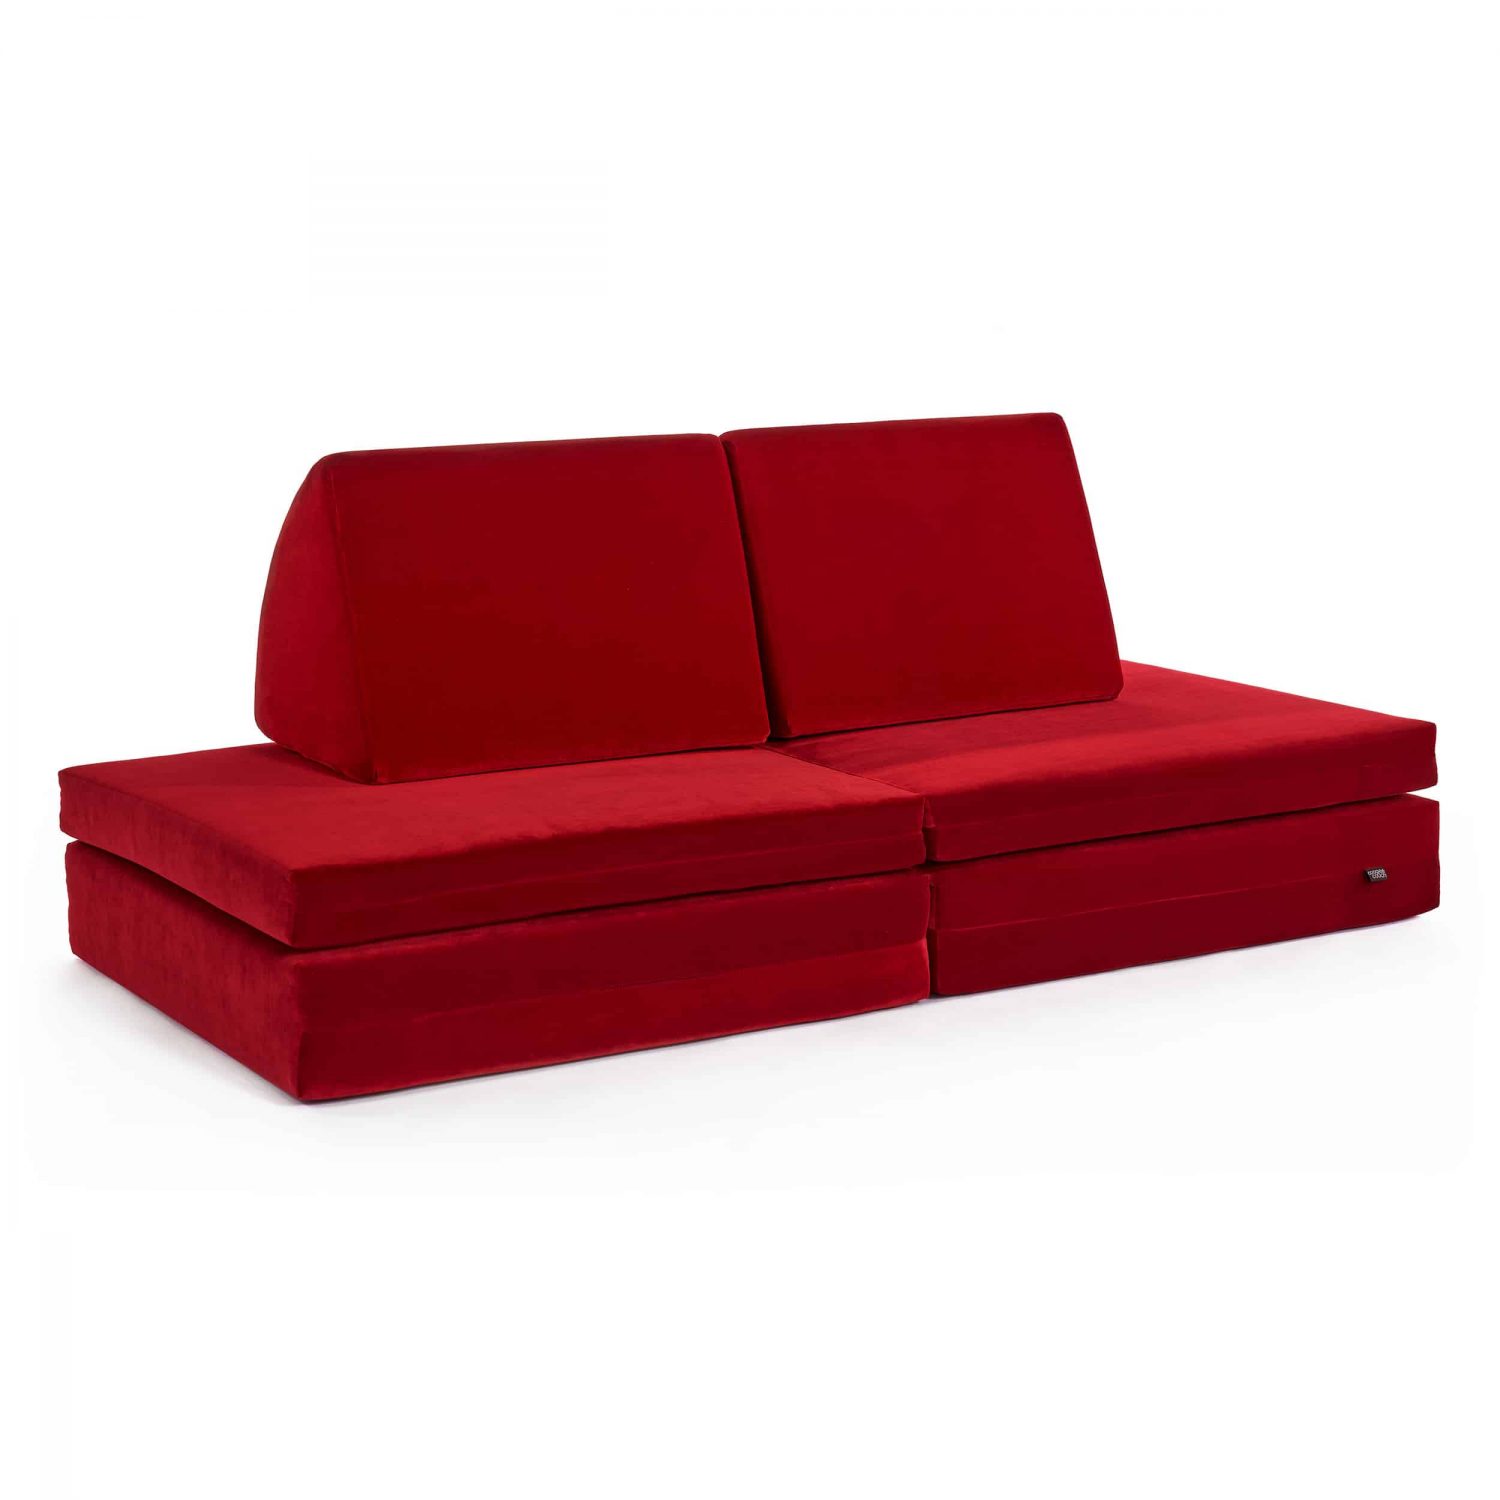 coogeecouch | kids sofa | series: scuderia-fantasia | color: chilli-red light red | view: front slanted | made in Germany